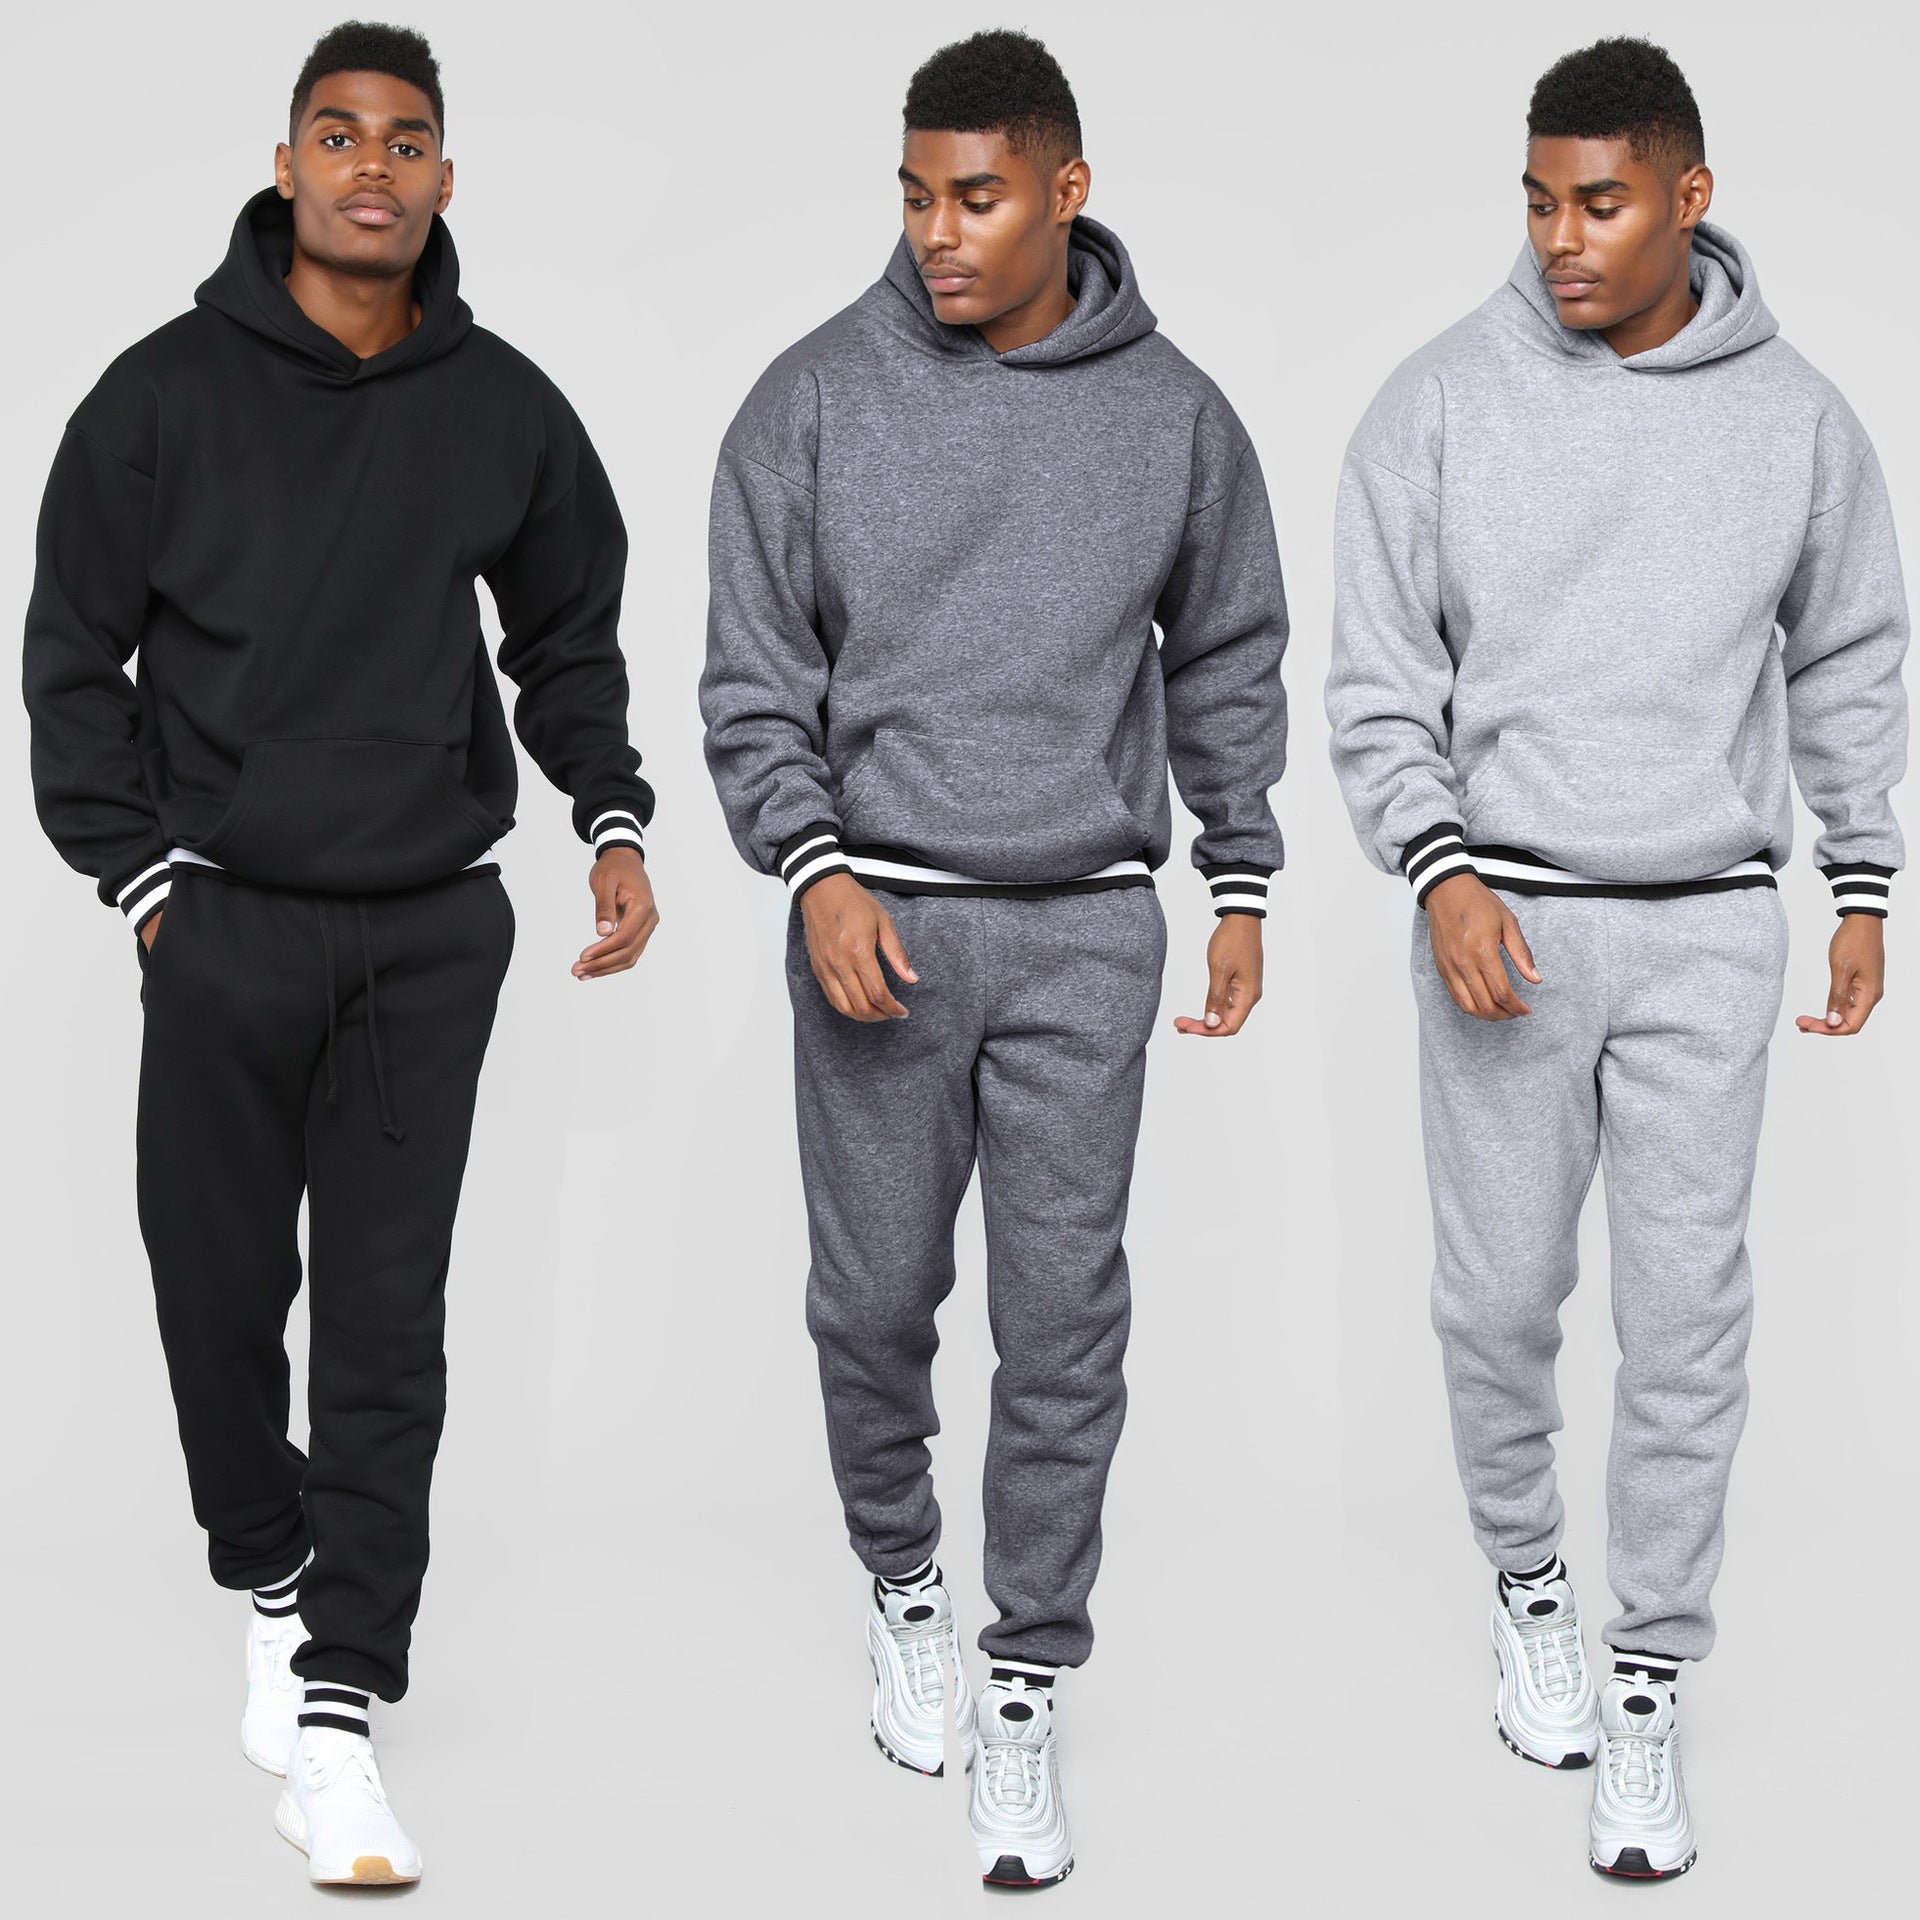 Custom Pullover High Quality Blank Sweat Suits Men Sweat Tracksuits Set Blank Jogging Suits Men sweatsuit With Pocket - Allen Fitness